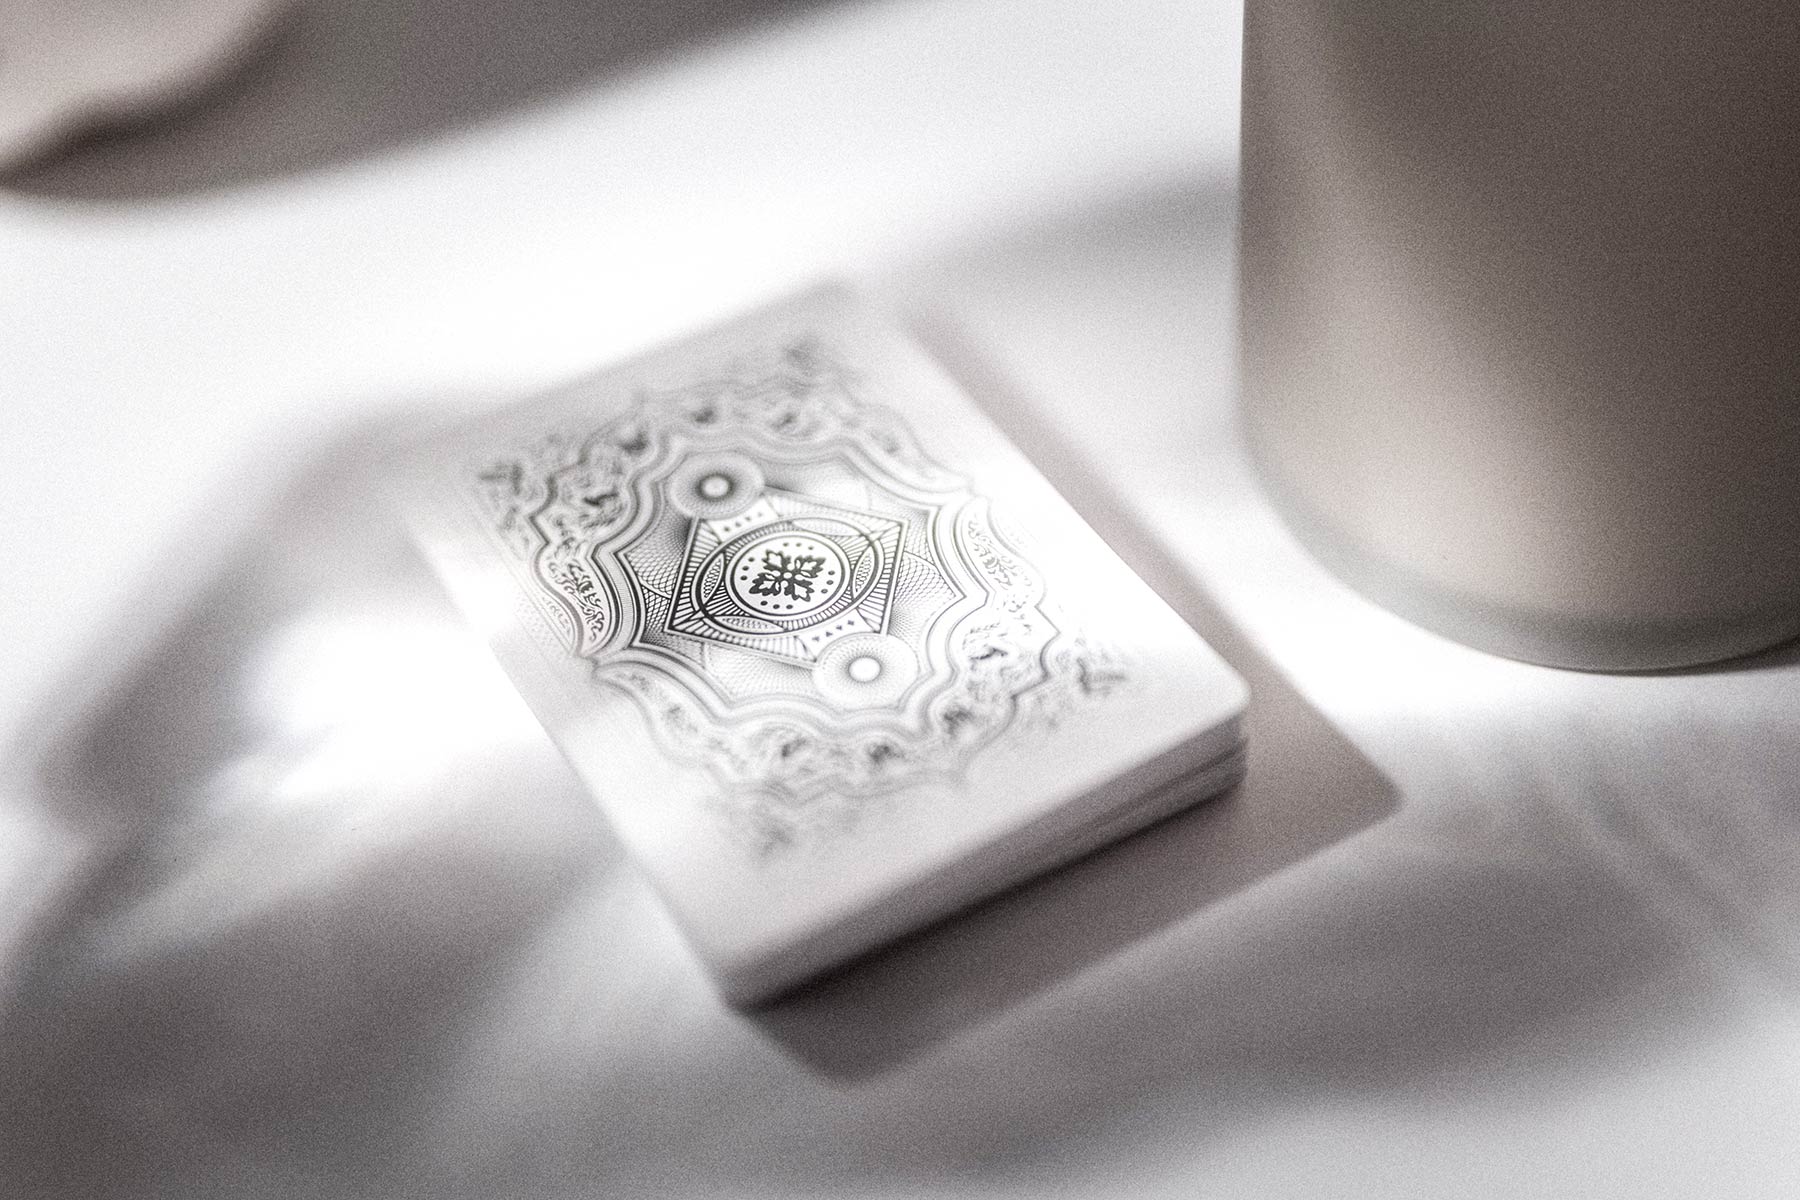 Ghost Cohorts by Luxury-pressed E7 | Ellusionist